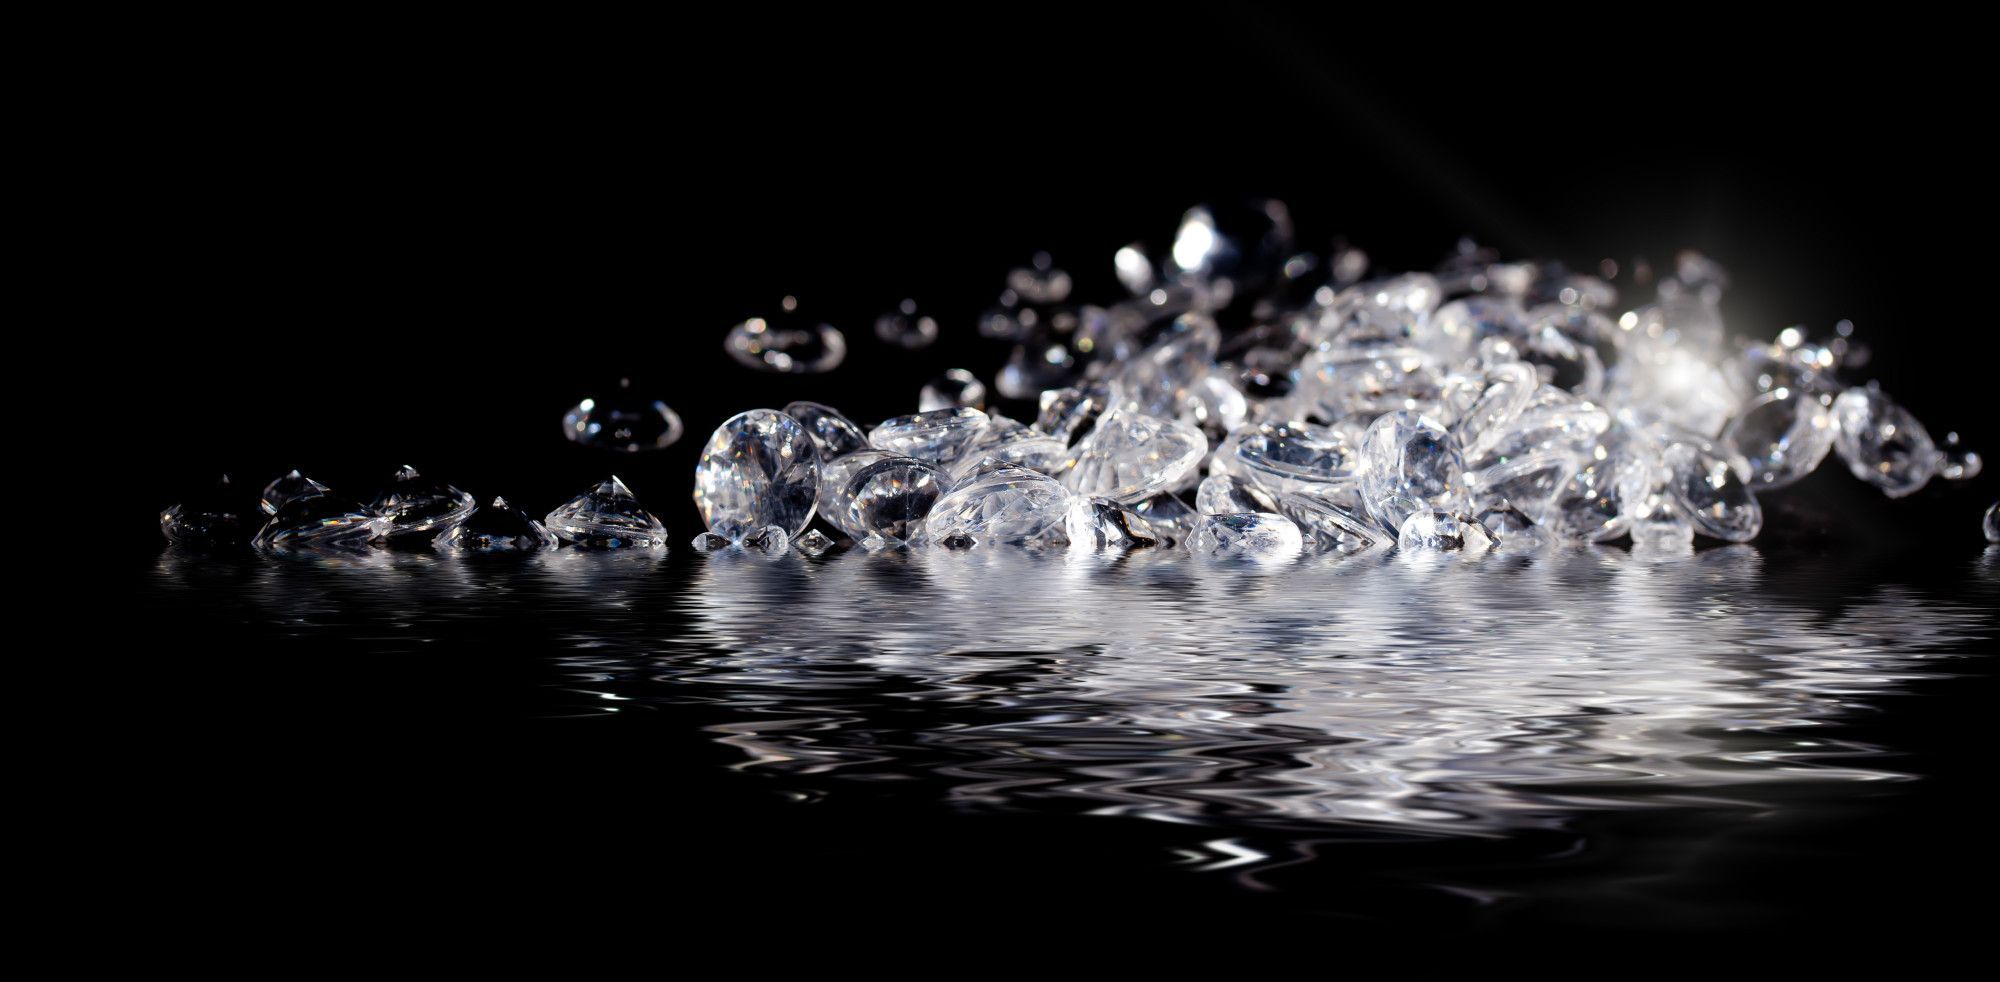 Best Diamond Wallpapers Hd | Onlybackground